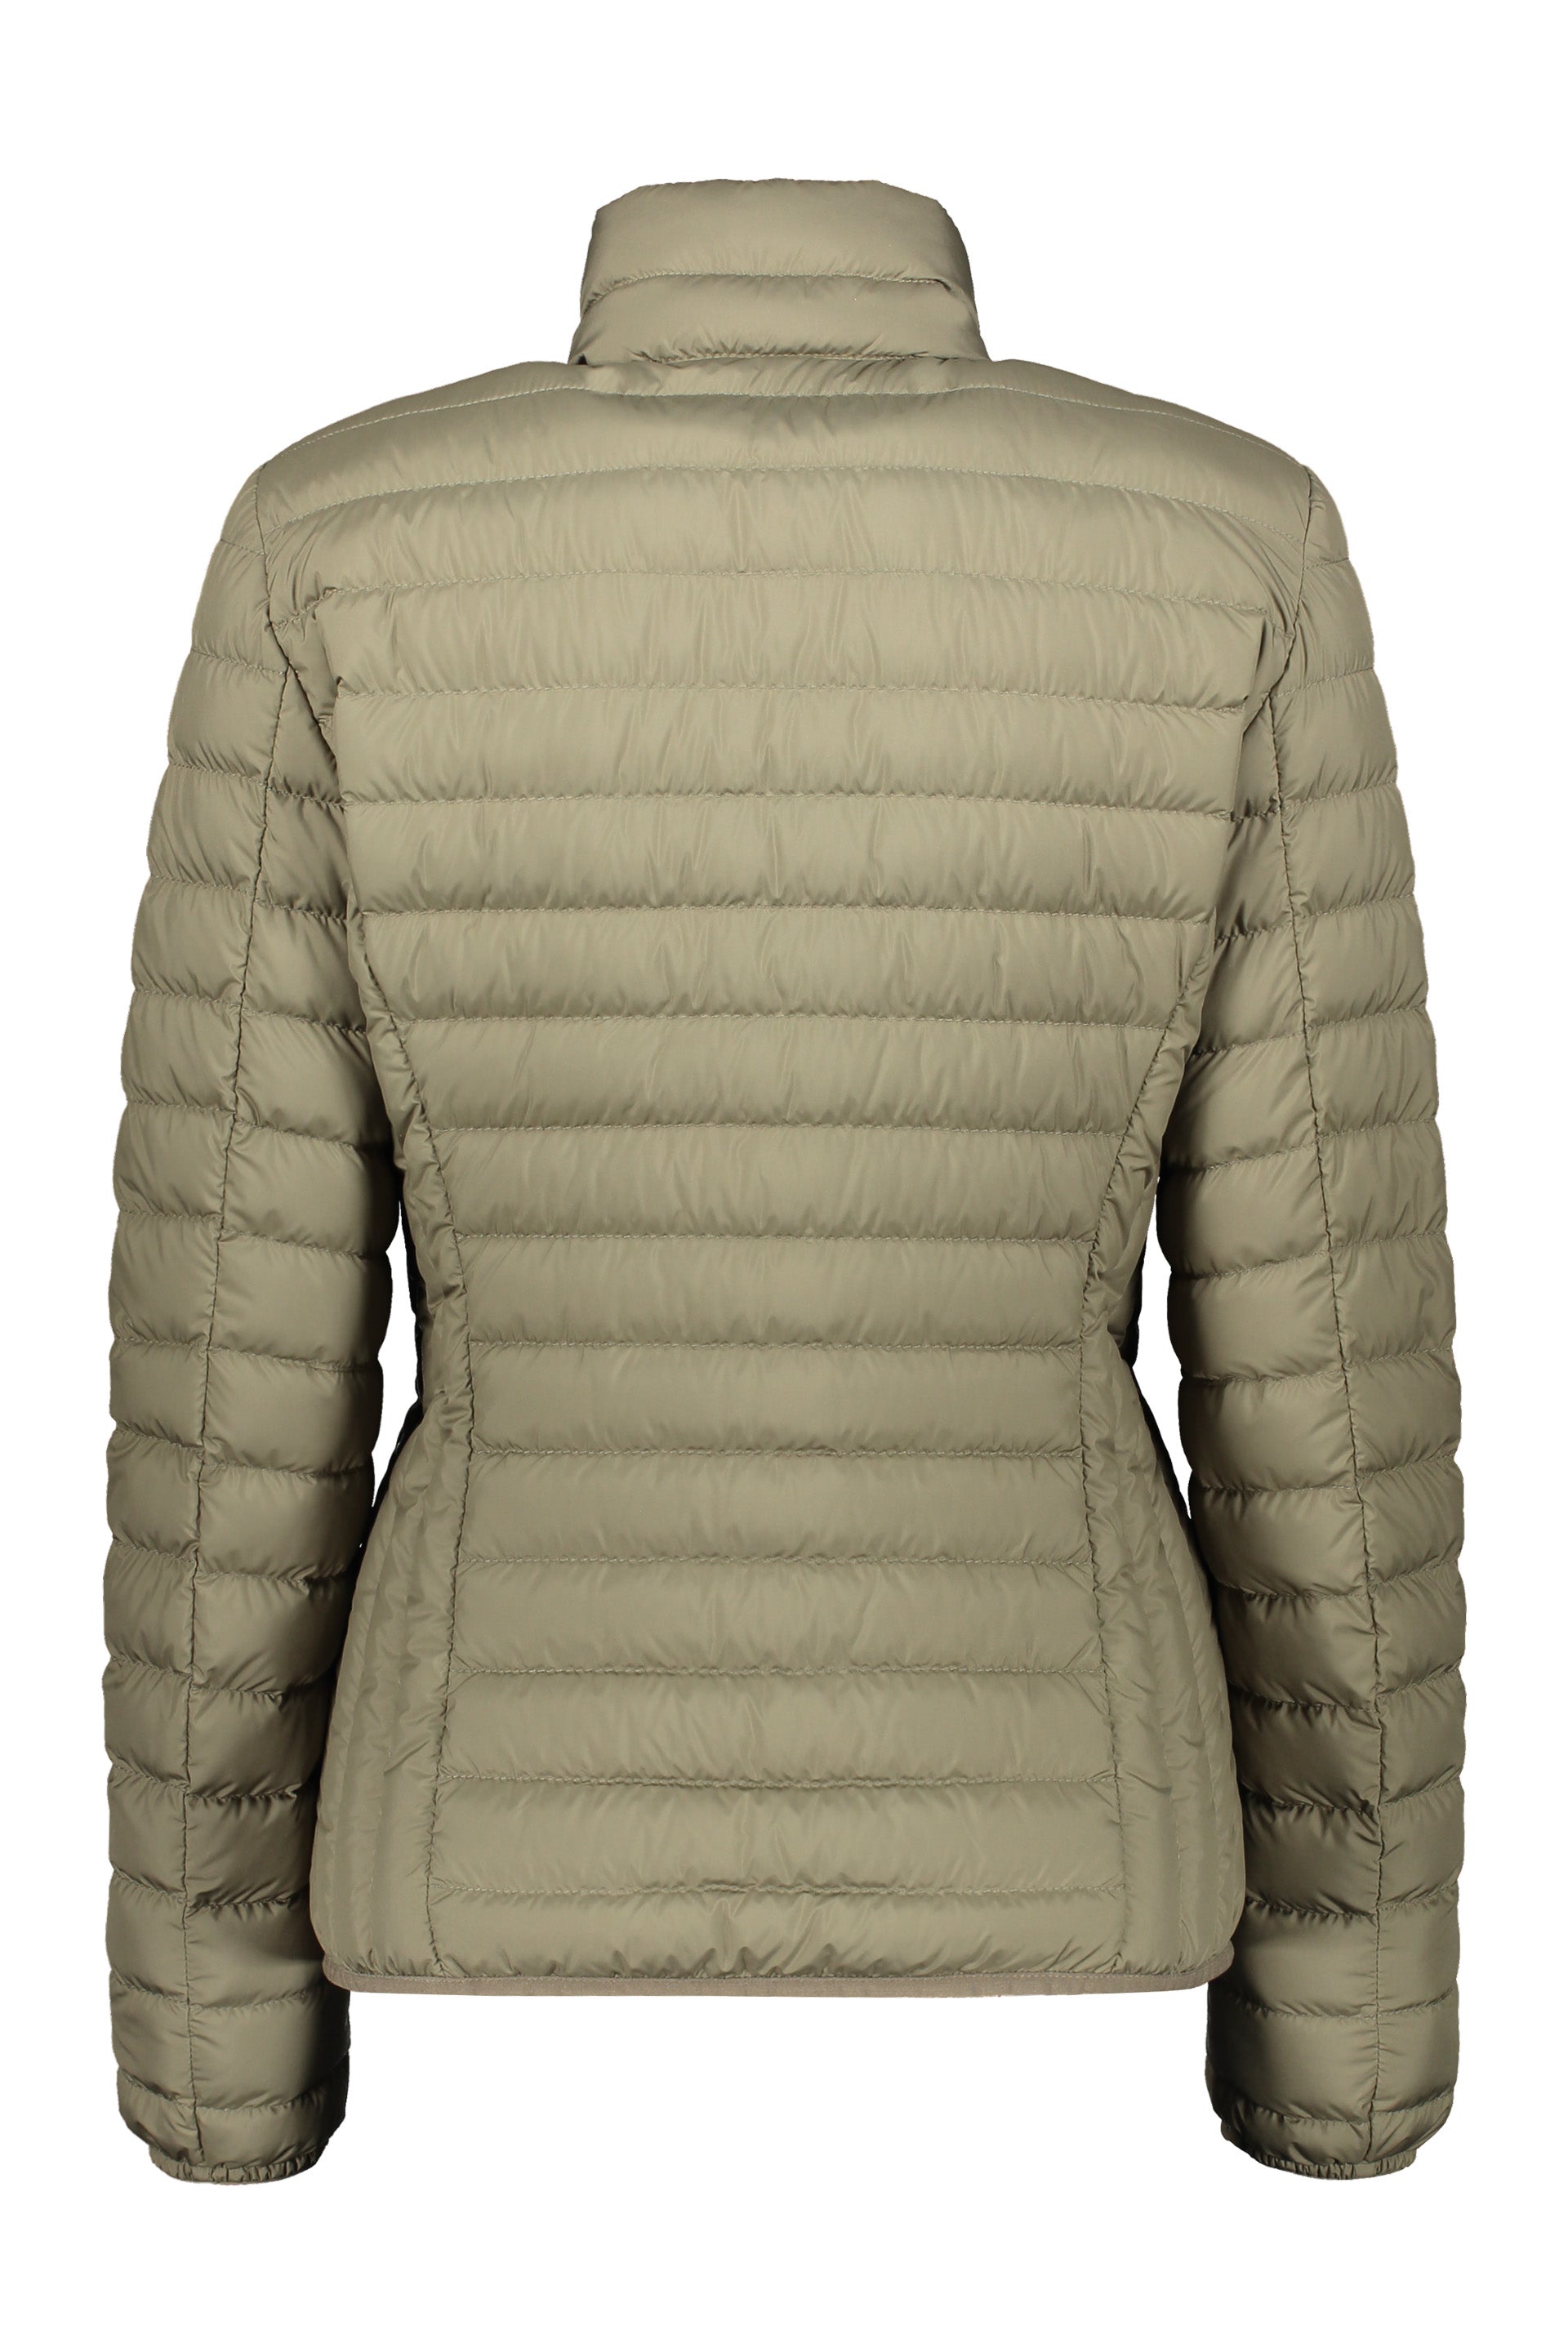 Parajumpers-OUTLET-SALE-Geena-short-down-jacket-Jacken-Mantel-ARCHIVE-COLLECTION-2.jpg